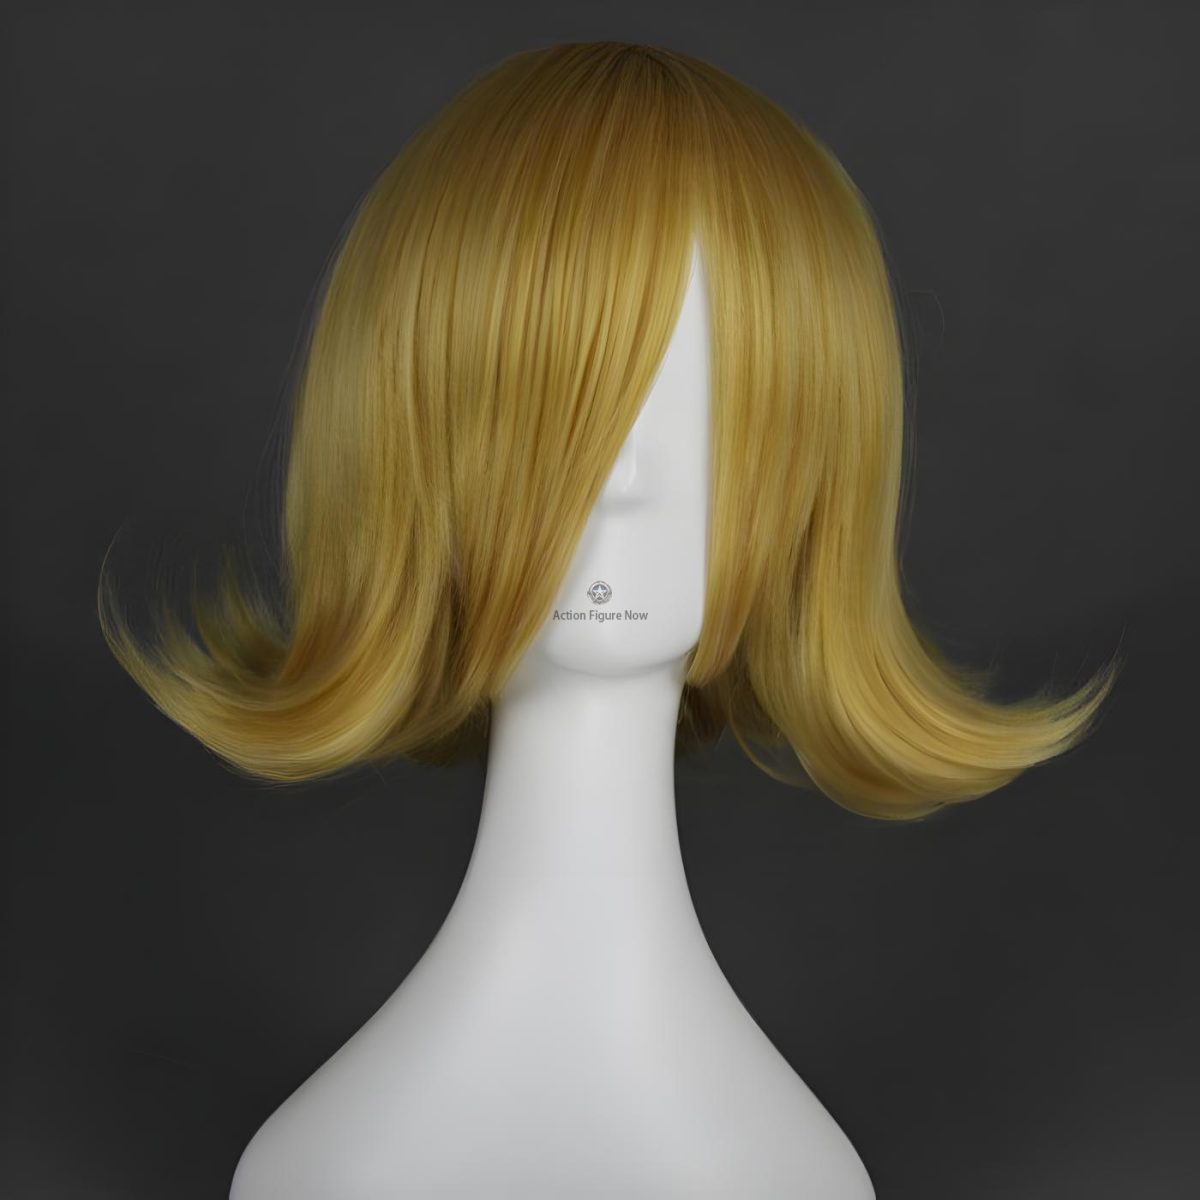 Vocaloid - Lin Cosplay Wig